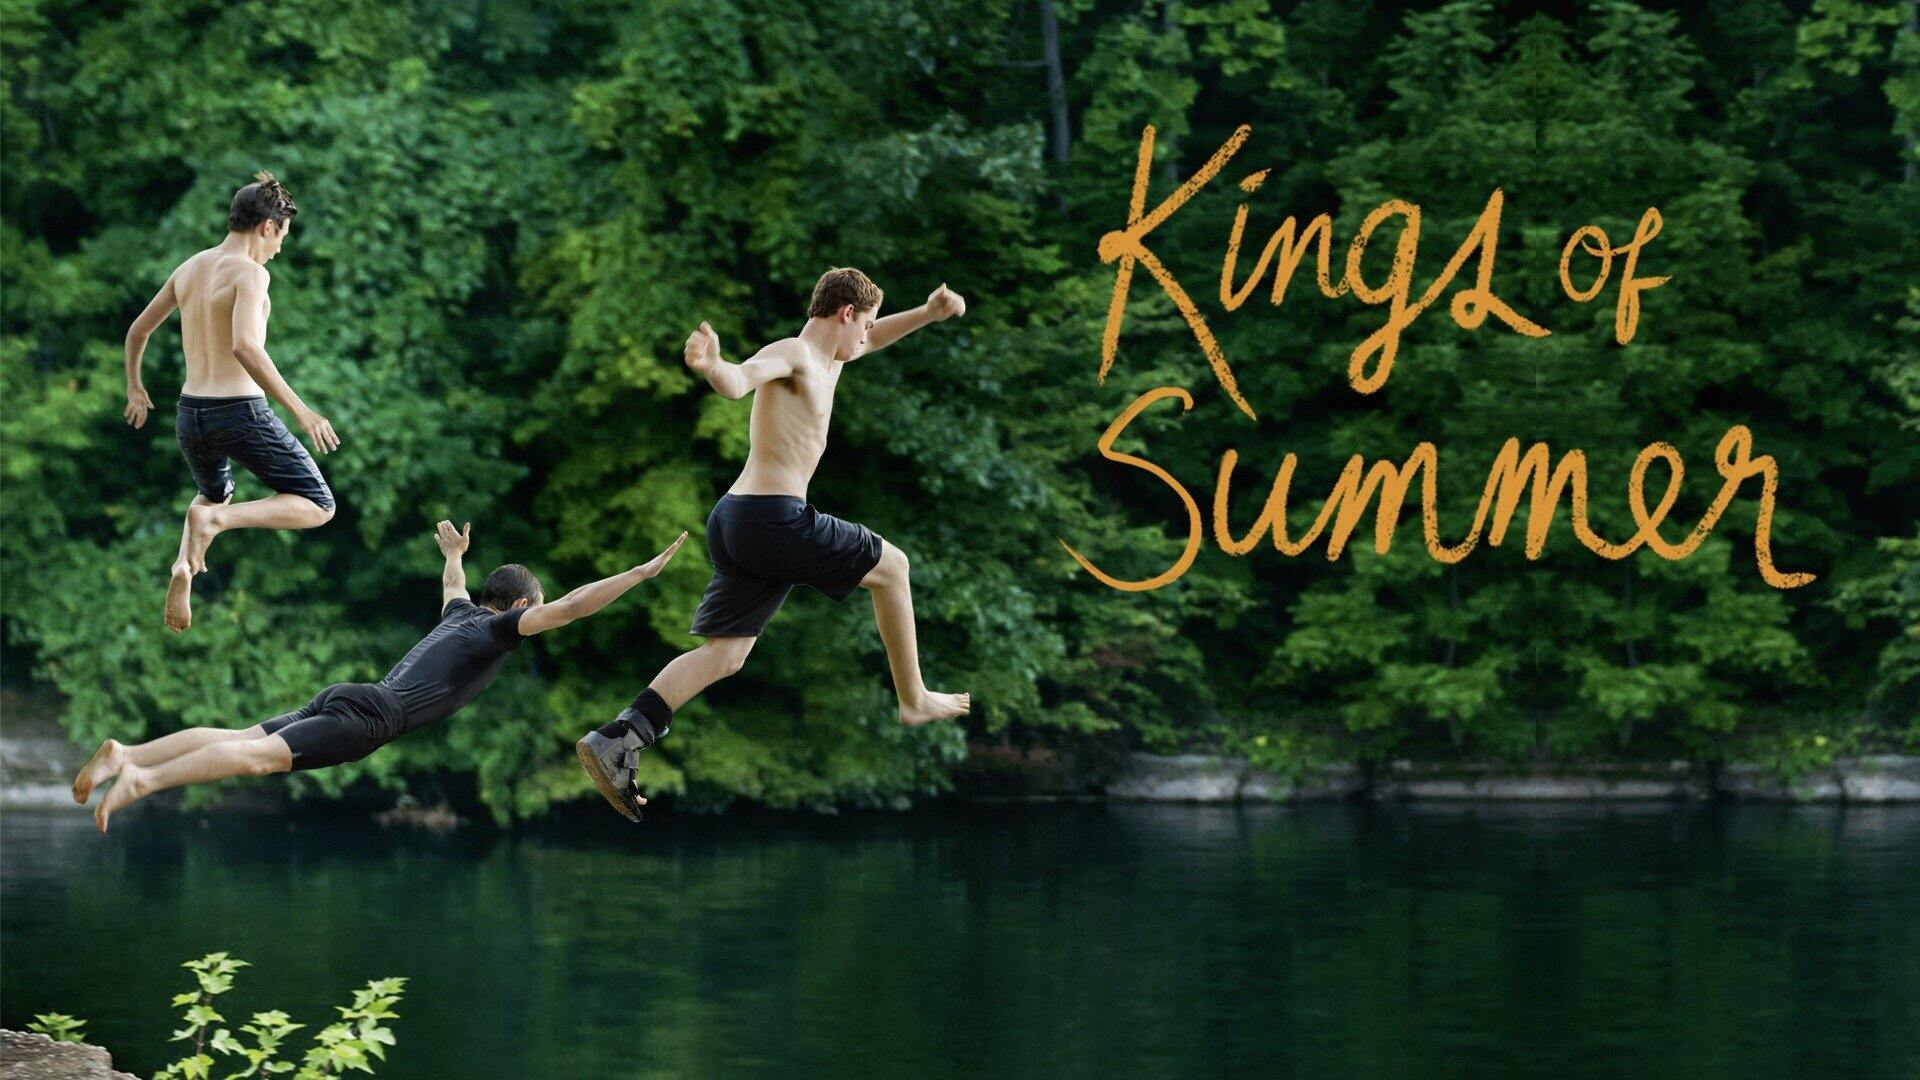 46-facts-about-the-movie-the-kings-of-summer